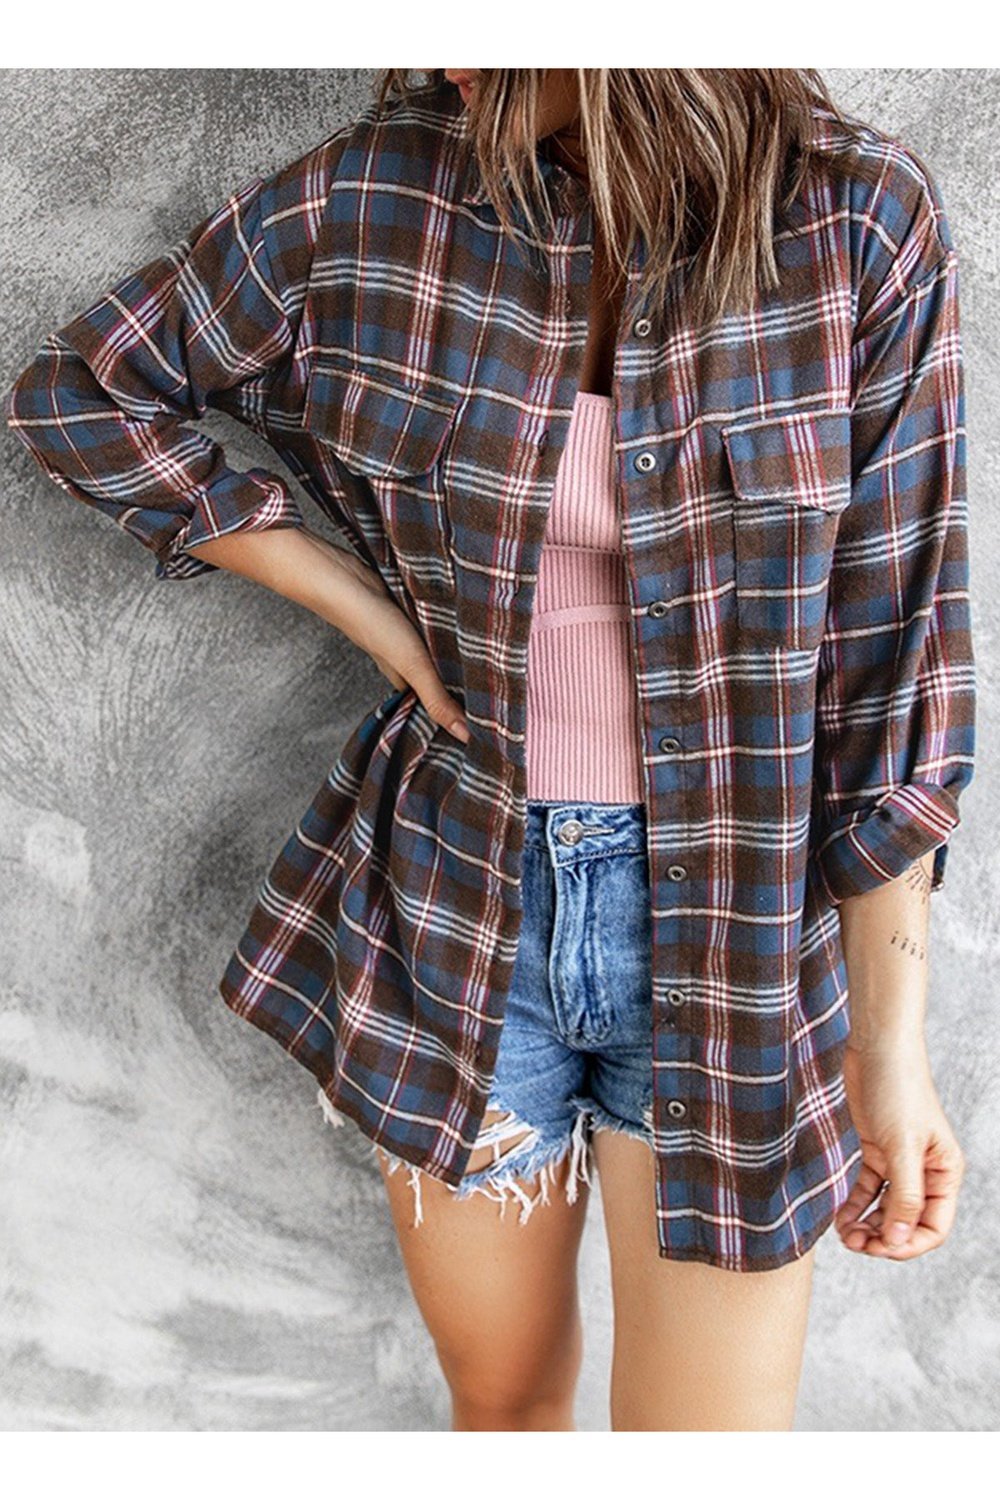 Plaid Slit High-Low Shirt with Pockets - Shirts - FITGGINS